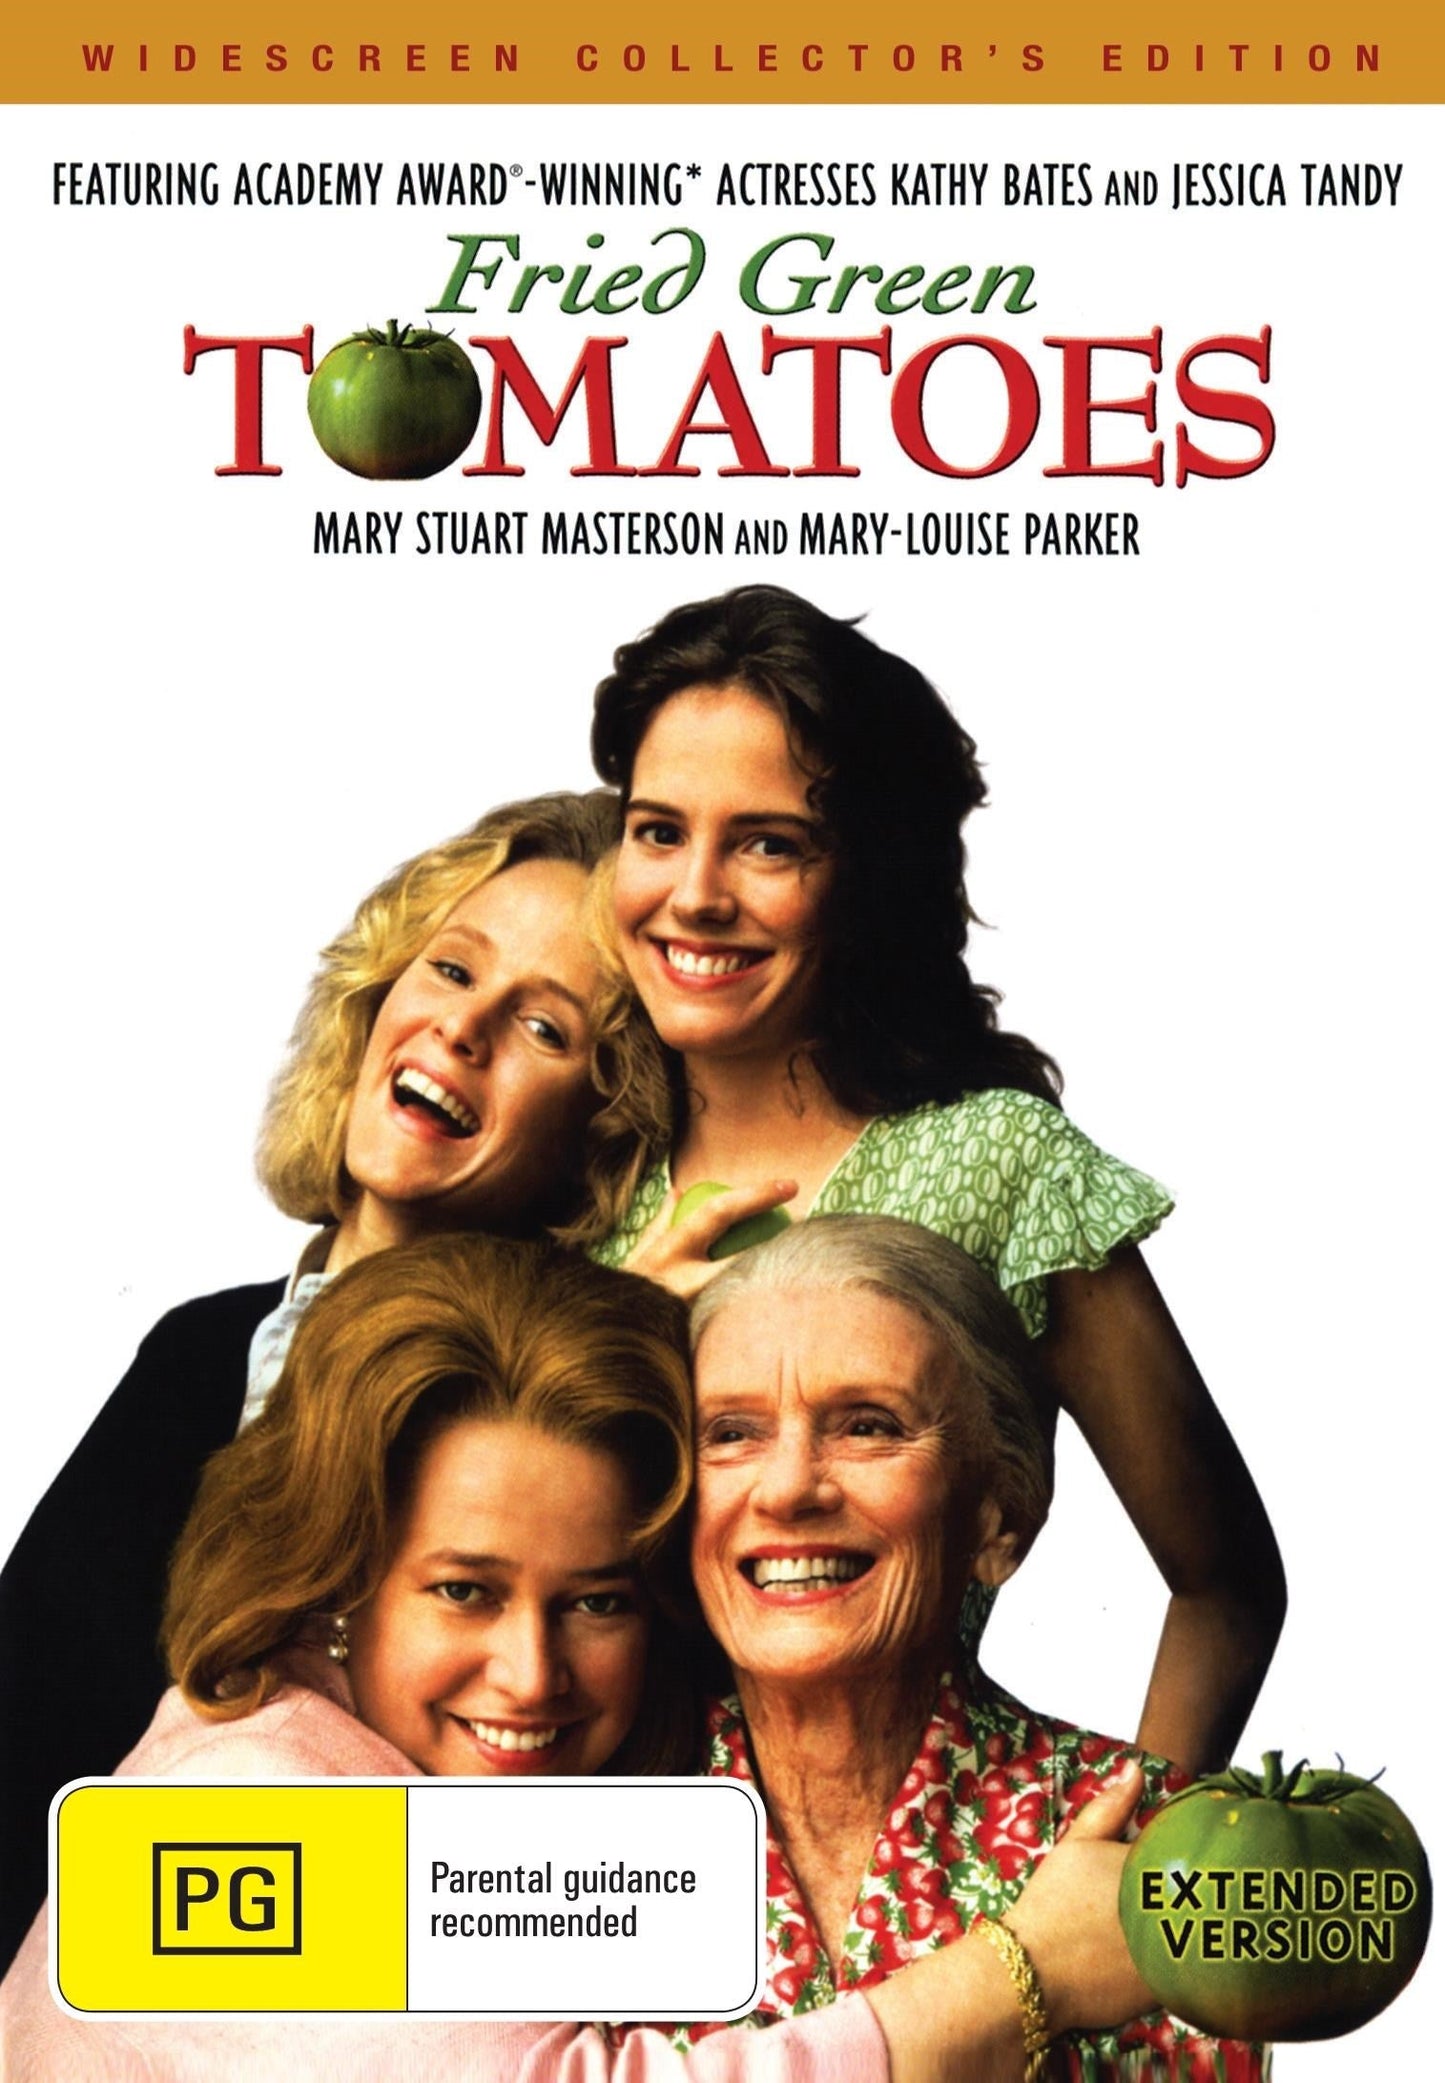 Fried Green Tomatoes rareandcollectibledvds